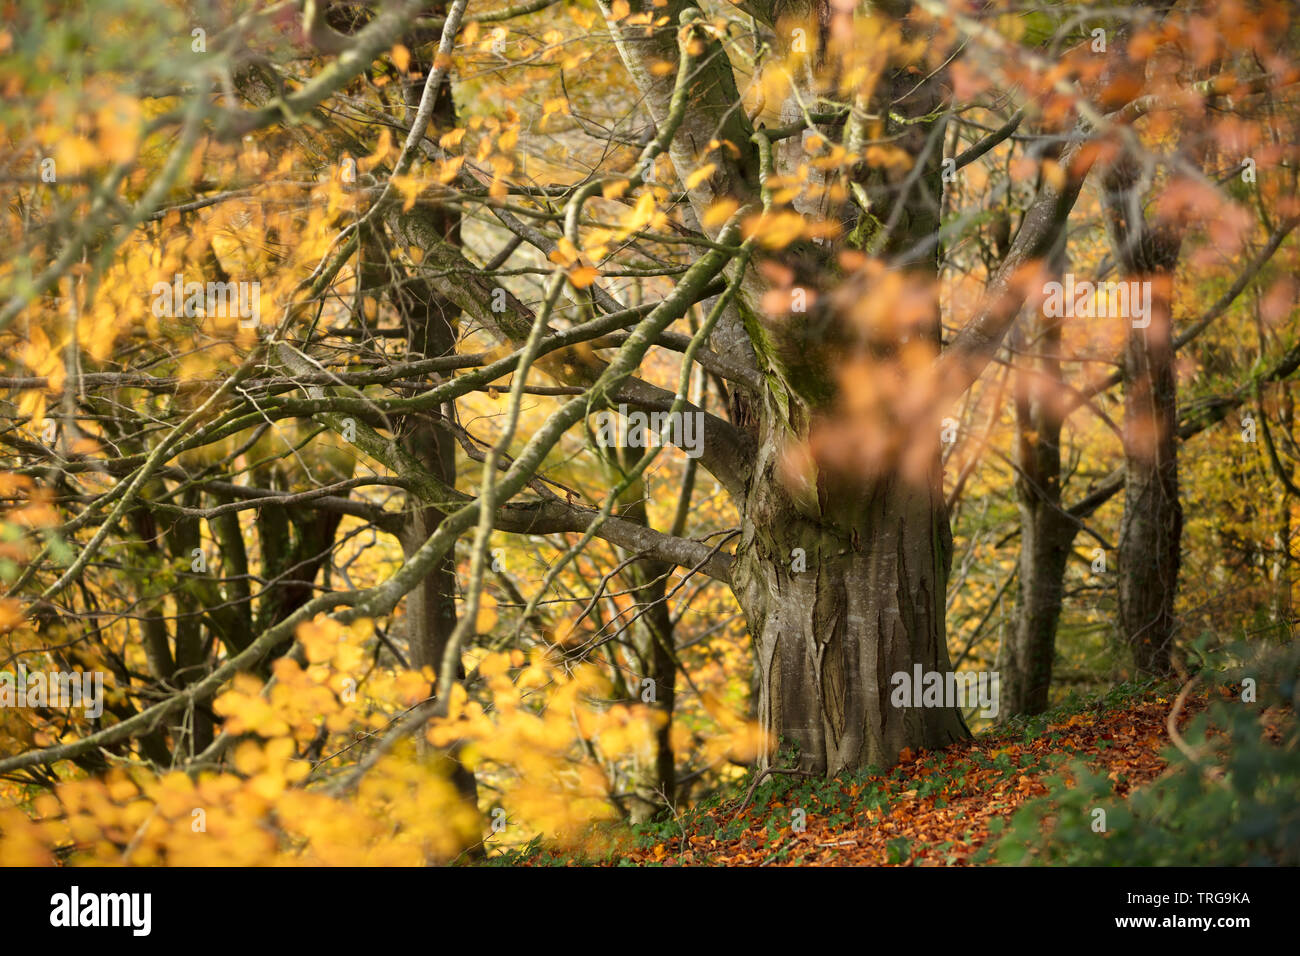 Autumn colours in Holway Woods near Sandford Orcas, Dorset, England, UK Stock Photo